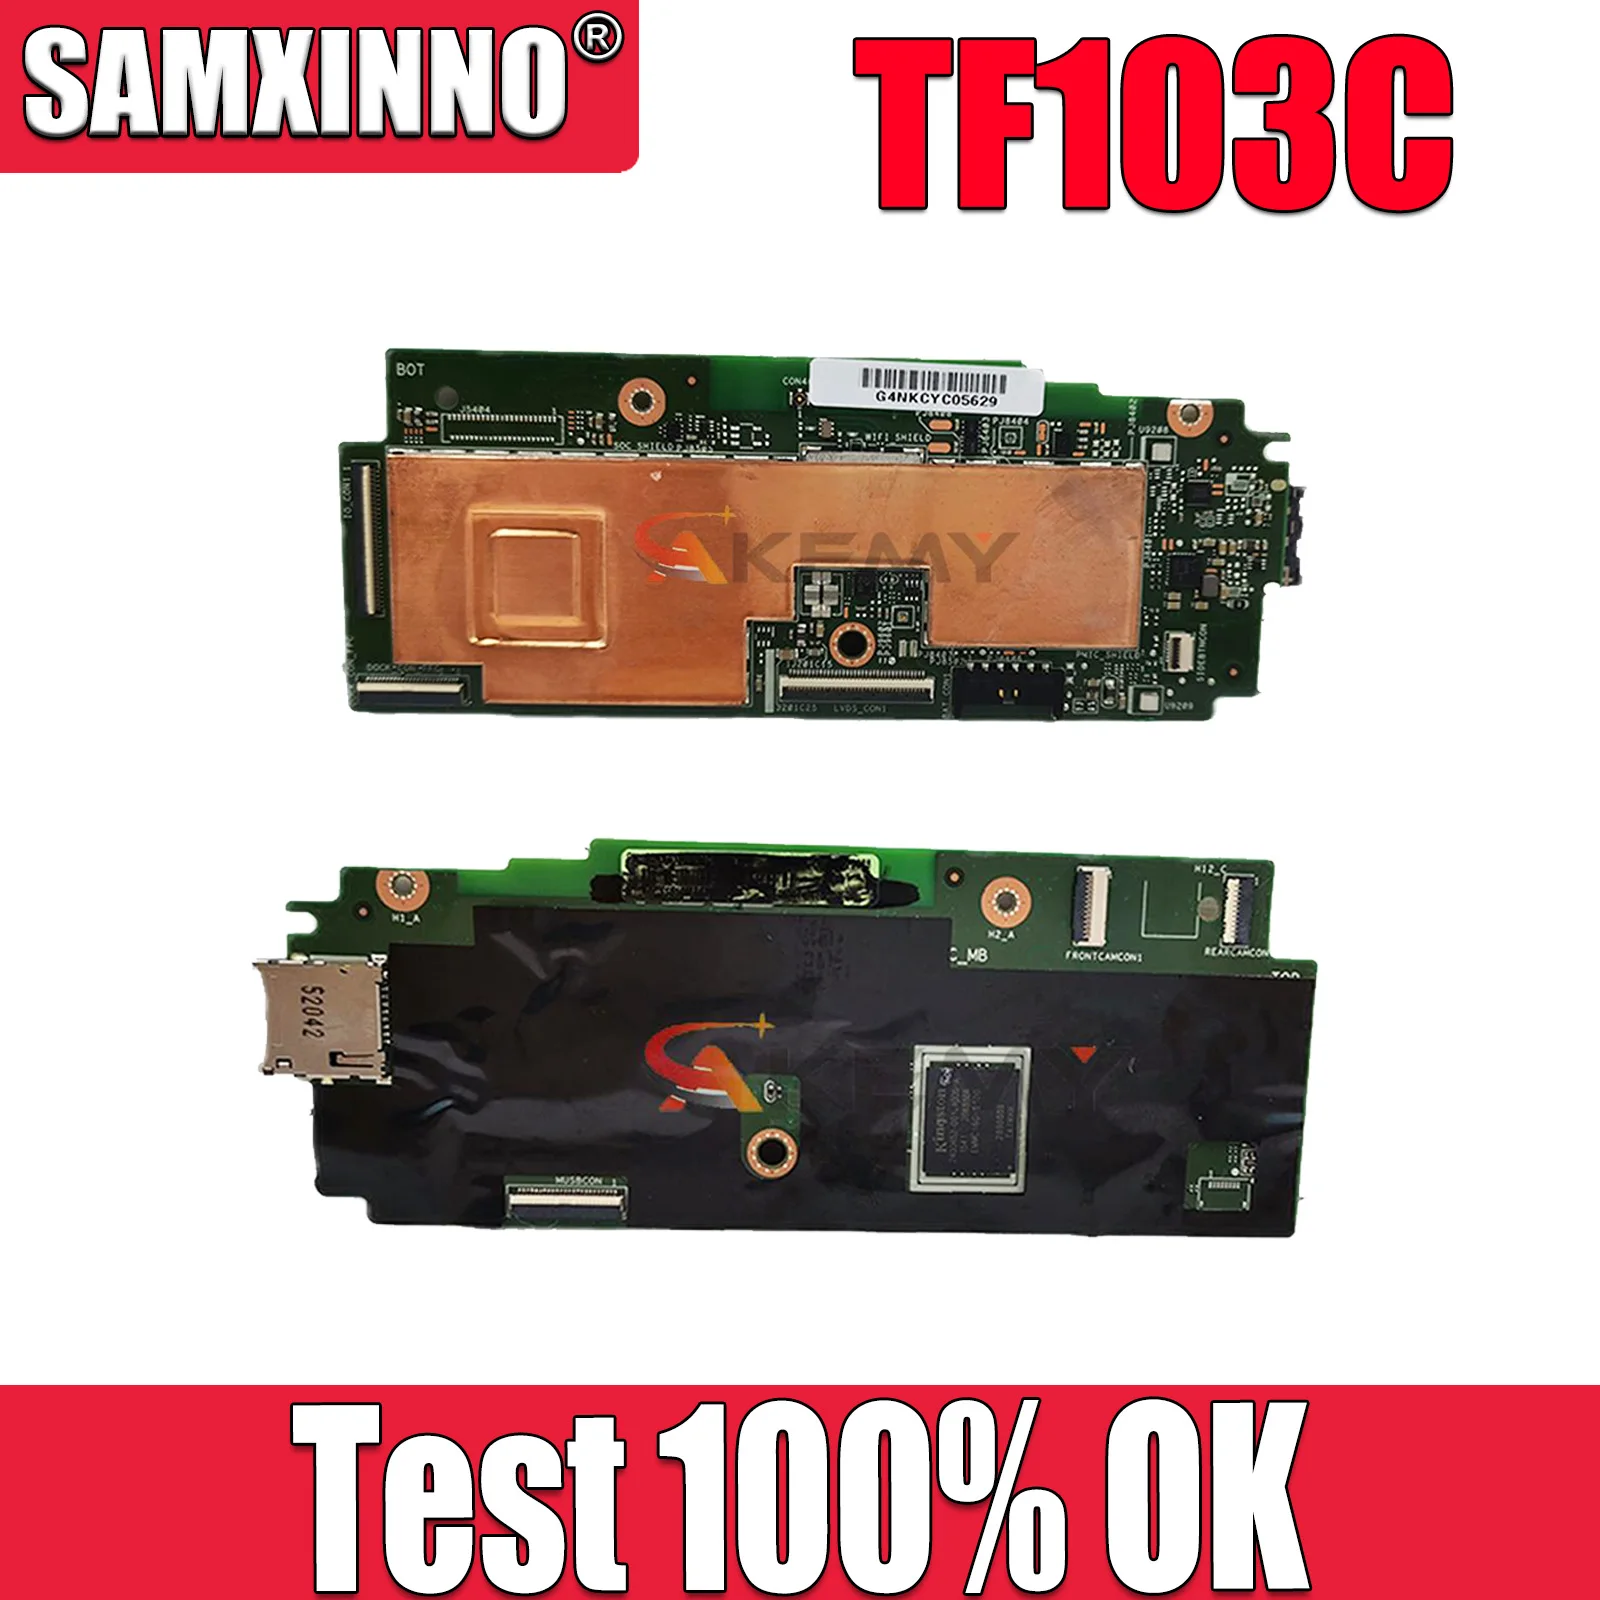 

Motherboard Work fine 100% test 60NK0100 K010 for ASUS TF103C me103cg TRANSFORMER PAD System Board Motherboard 16GB